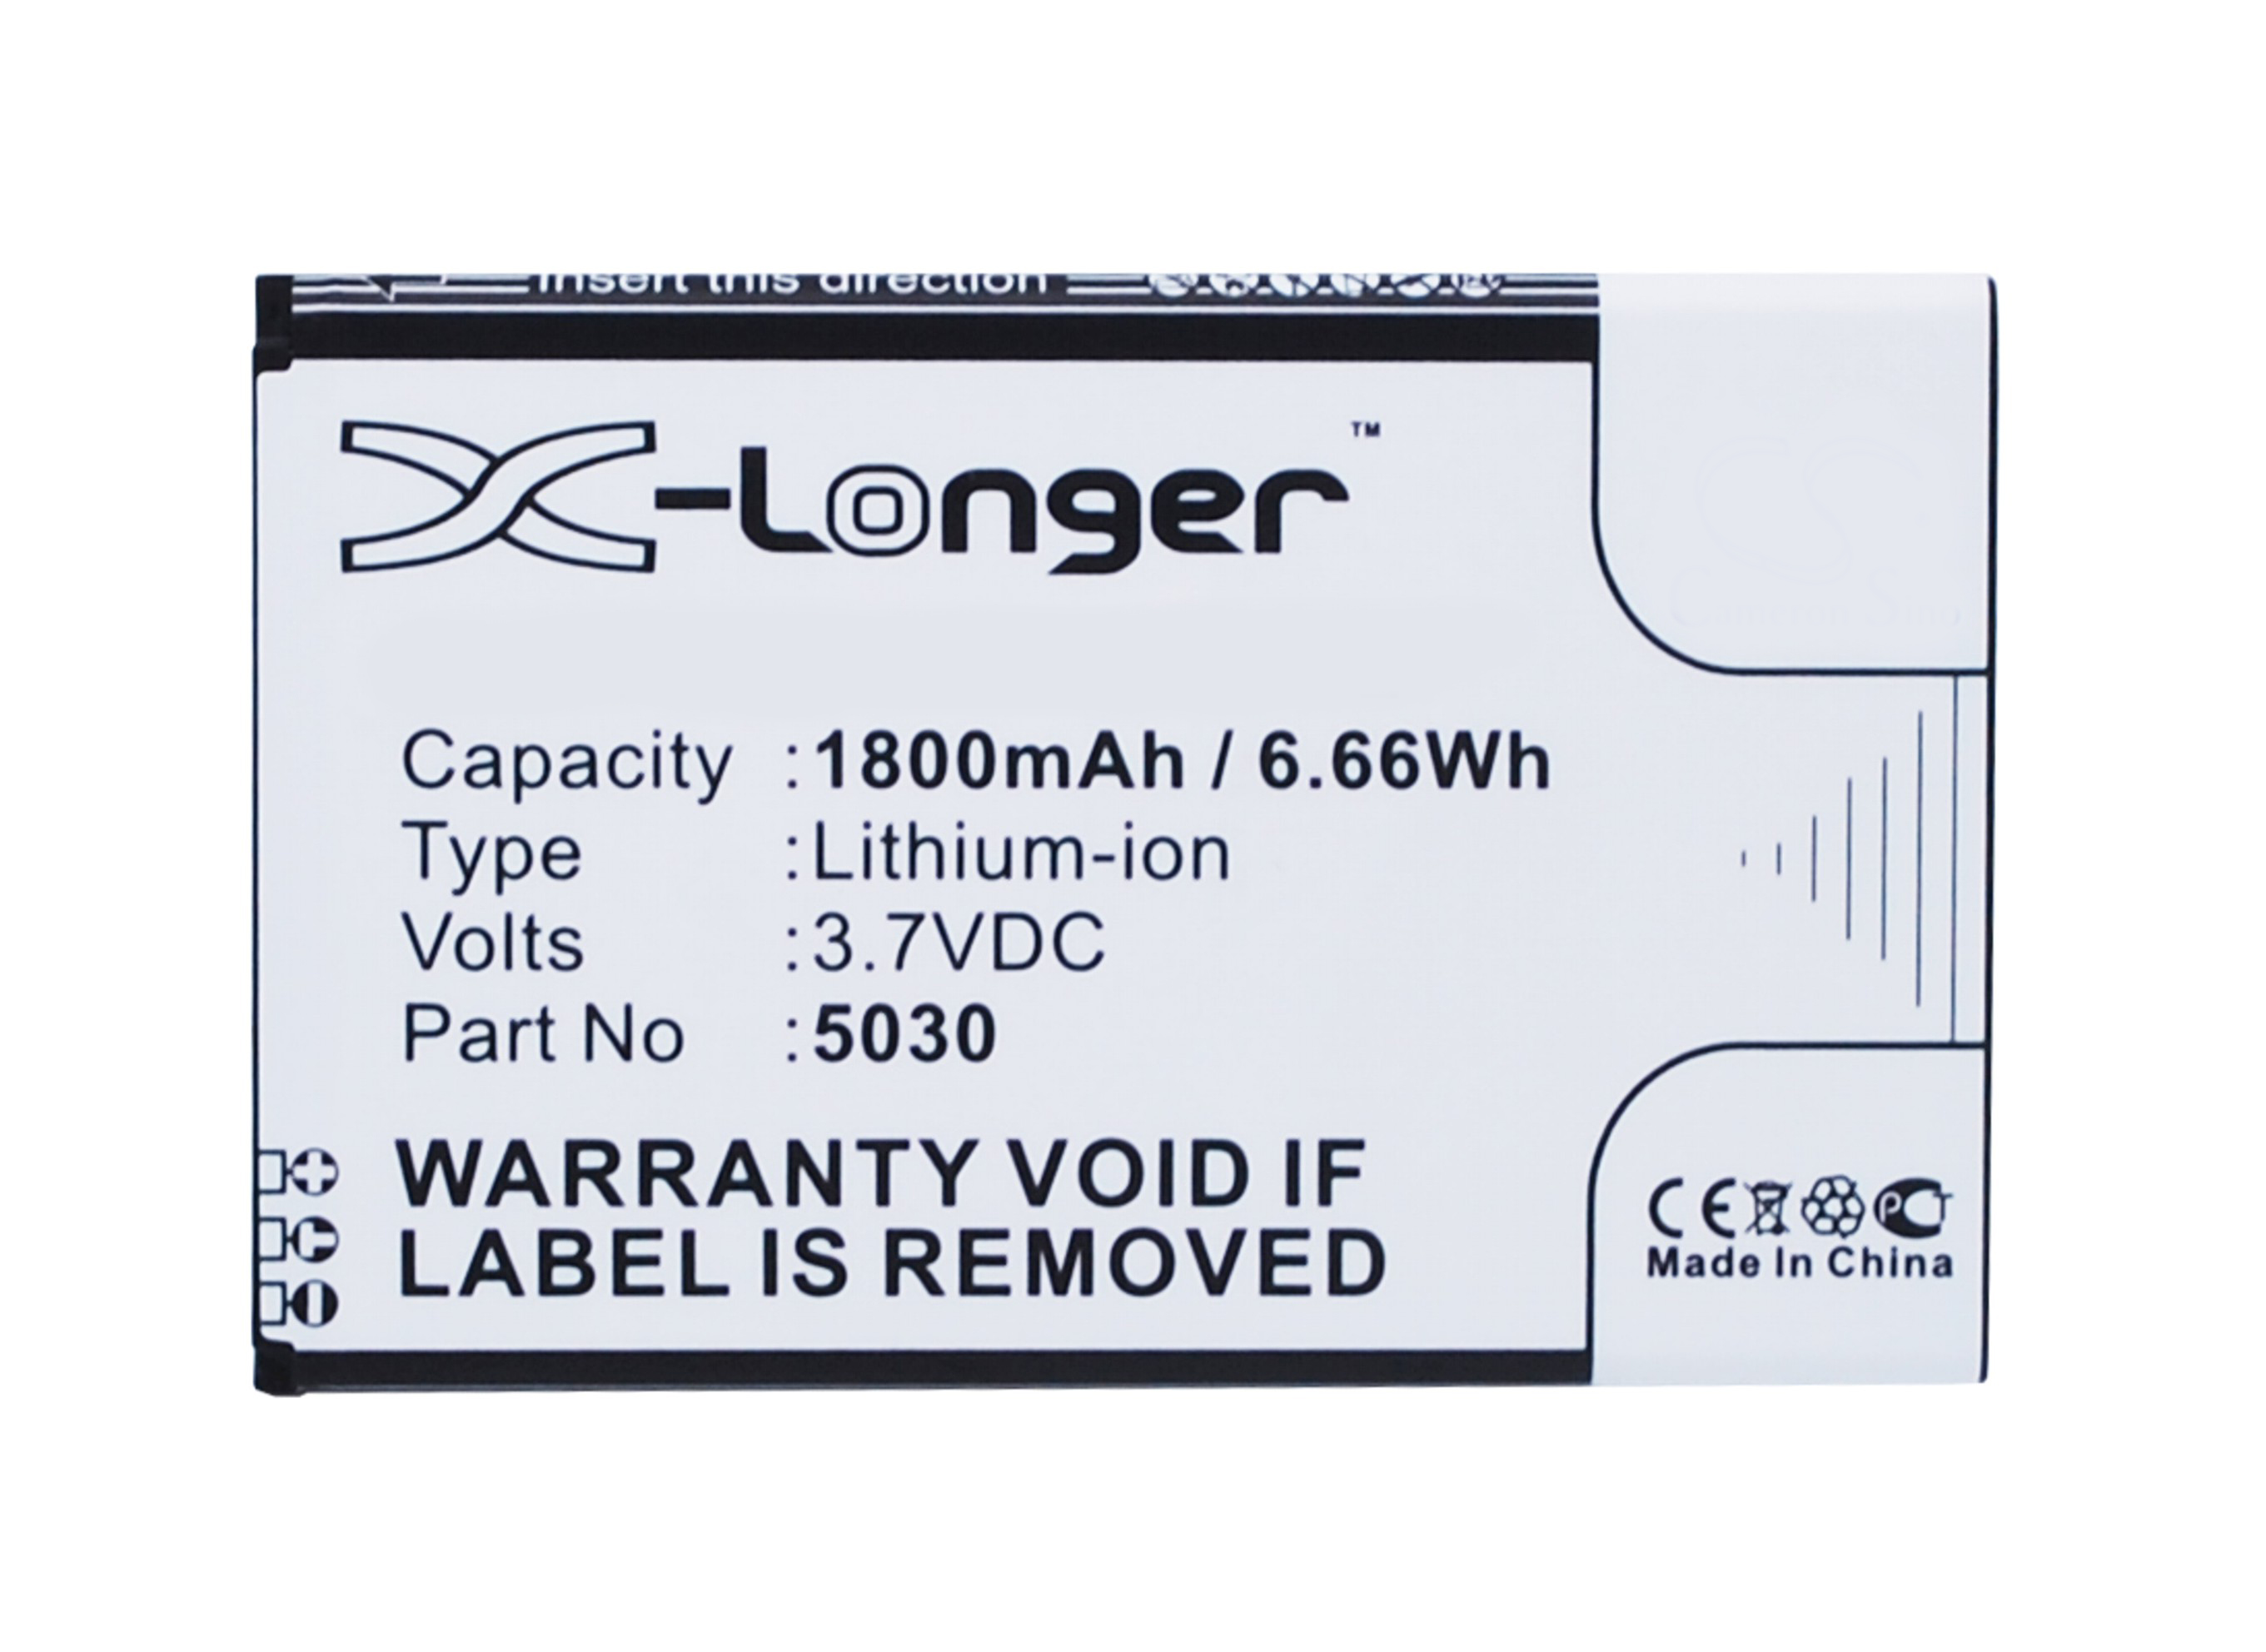 Synergy Digital Battery Compatible With Wiko 5030 Cellphone Battery - (Li-Ion, 3.7V, 1800 mAh / 6.66Wh)